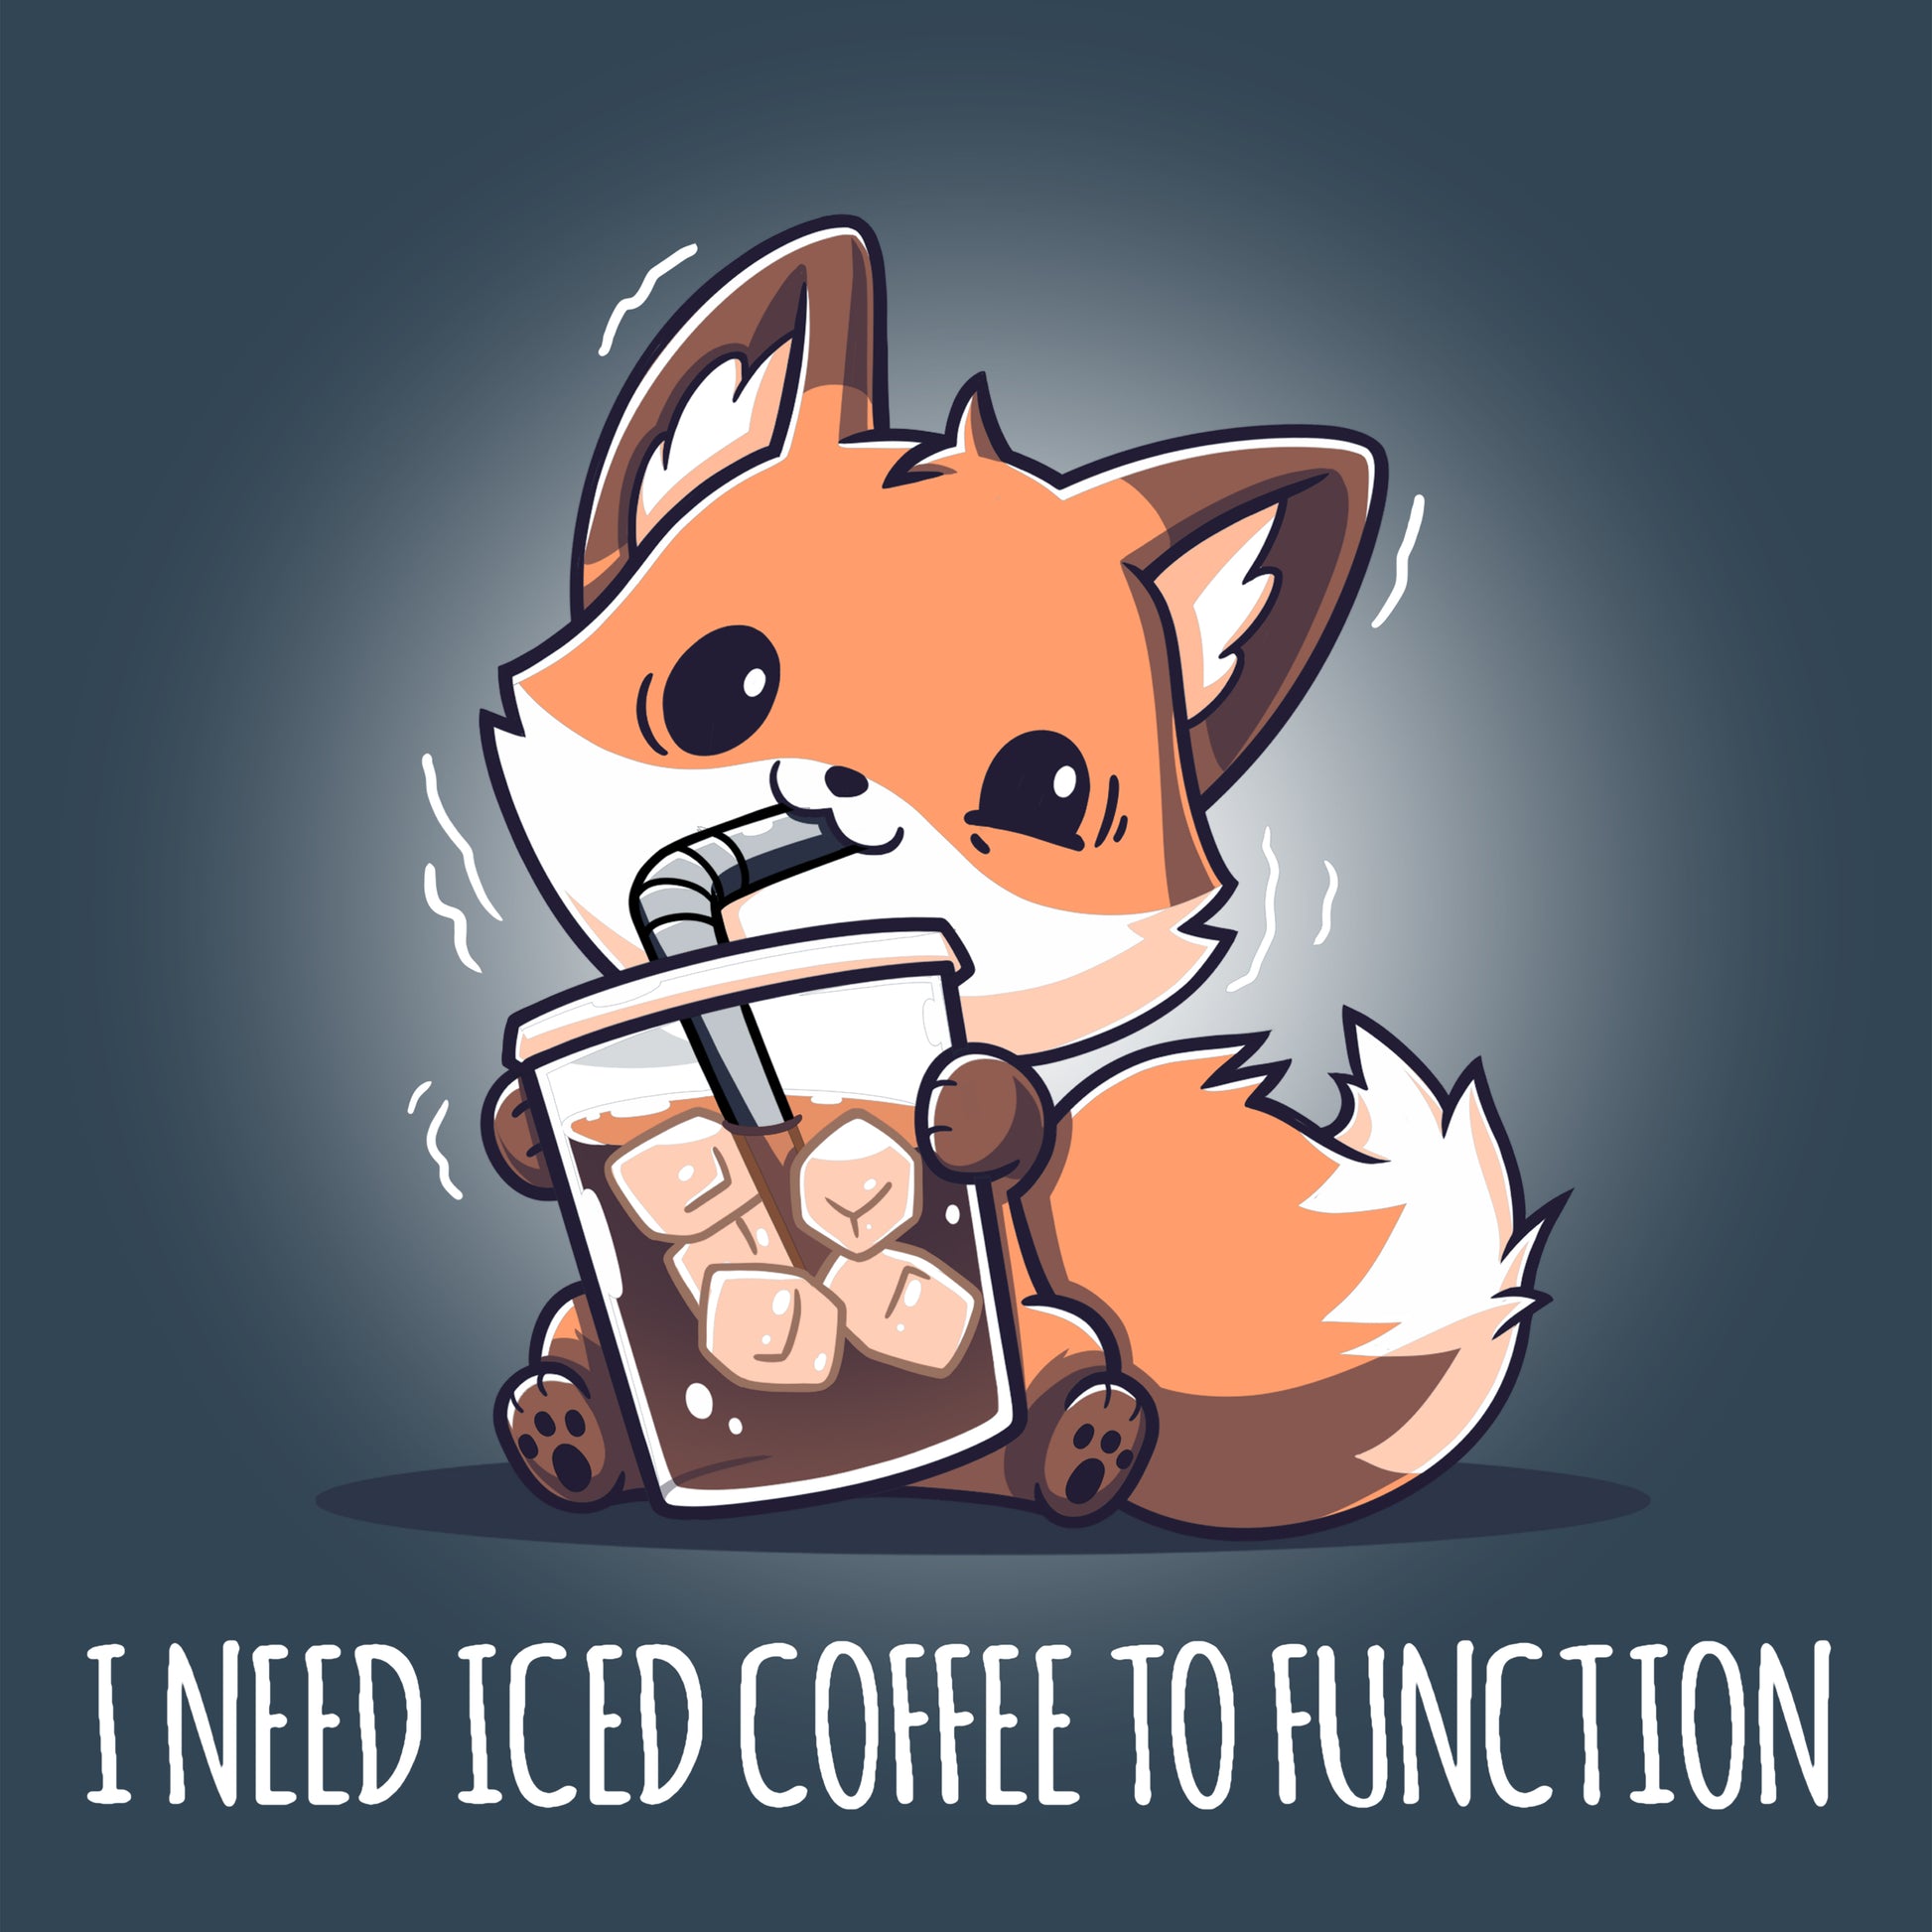 I need TeeTurtle's Iced Coffee To Function t-shirt to function.